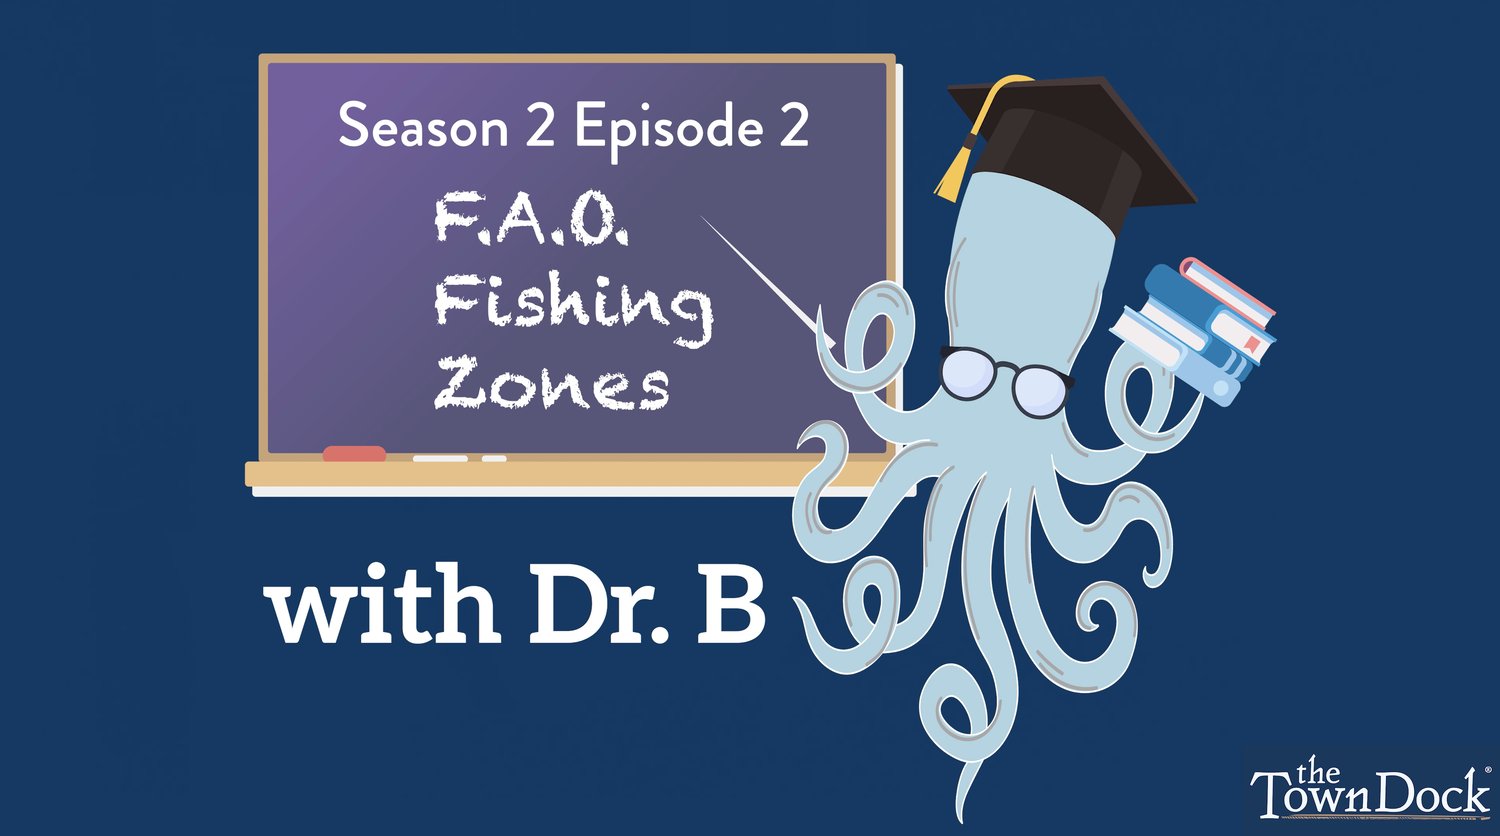 S2 E2: Where in the World Does Squid Come From?